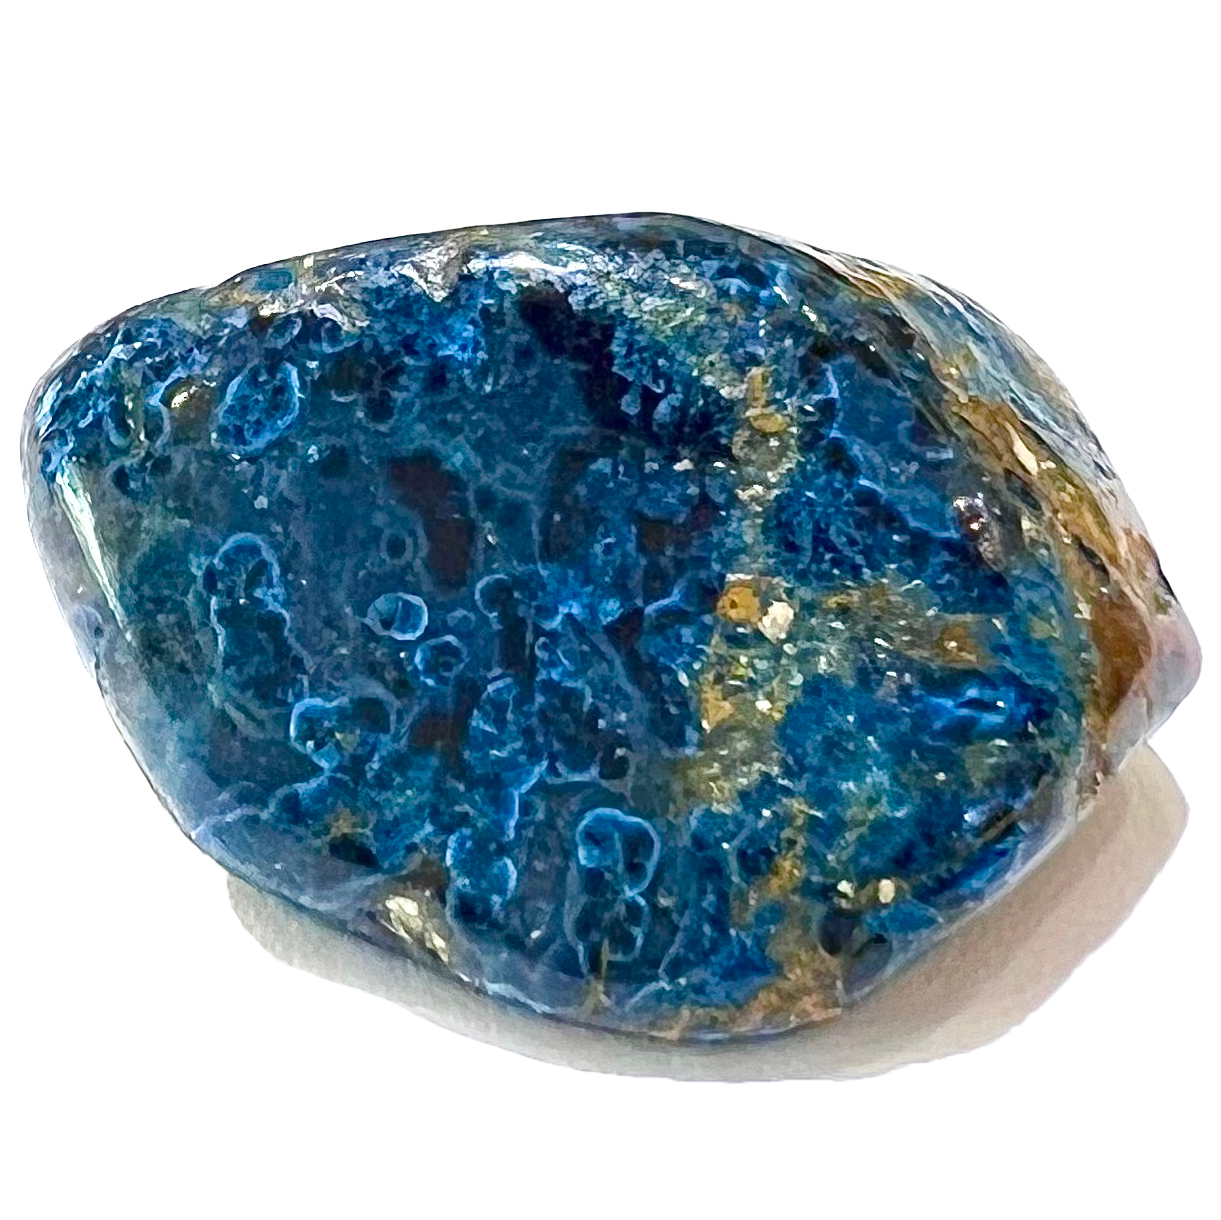 A tumble polished blue azurite stone.  The material is naturally stained dark blue and black.